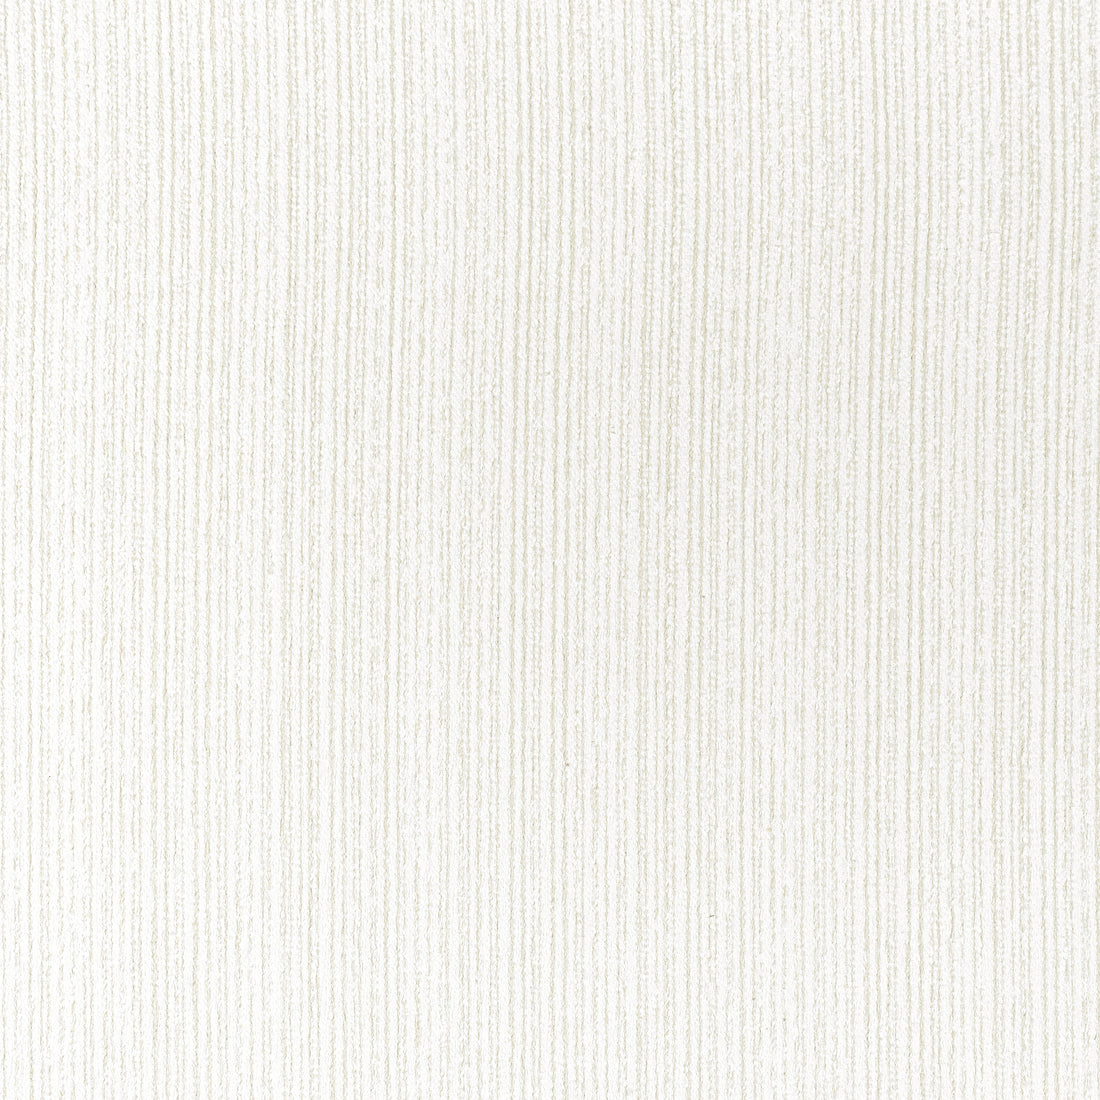 Zia Stripe fabric in salt color - pattern number W8802 - by Thibaut in the Haven collection